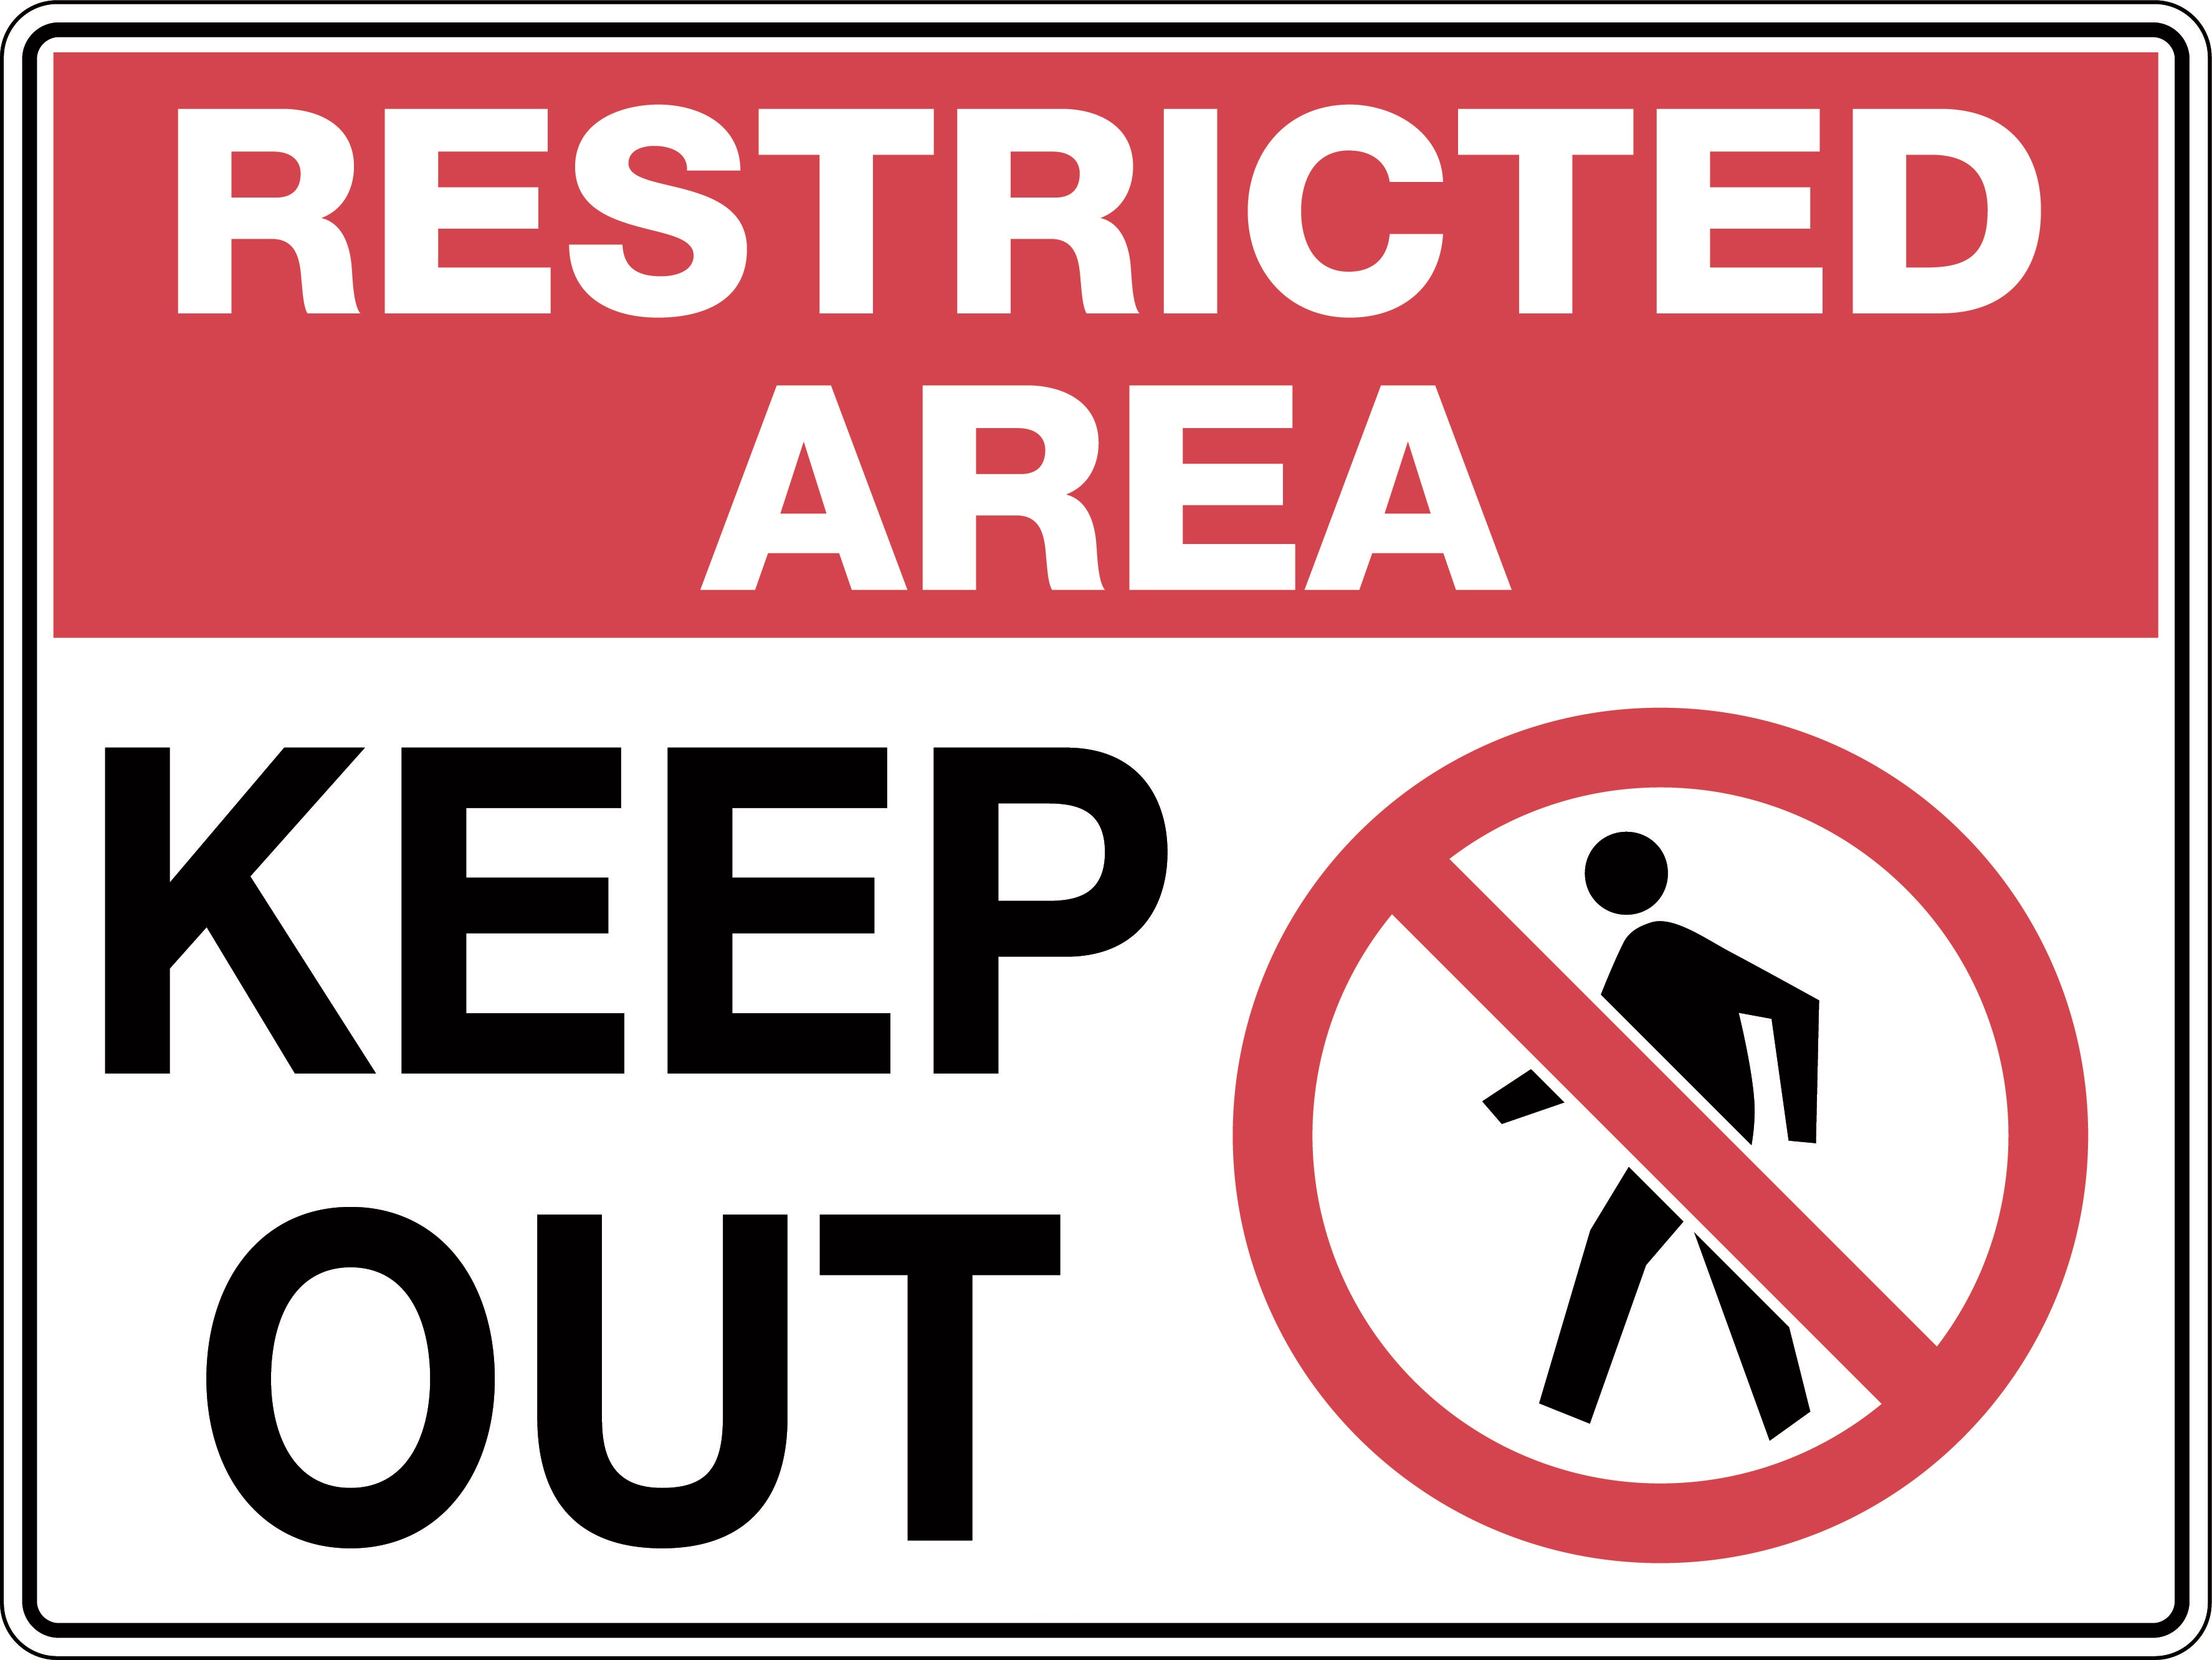 Restricted Area - Keep Out Sign